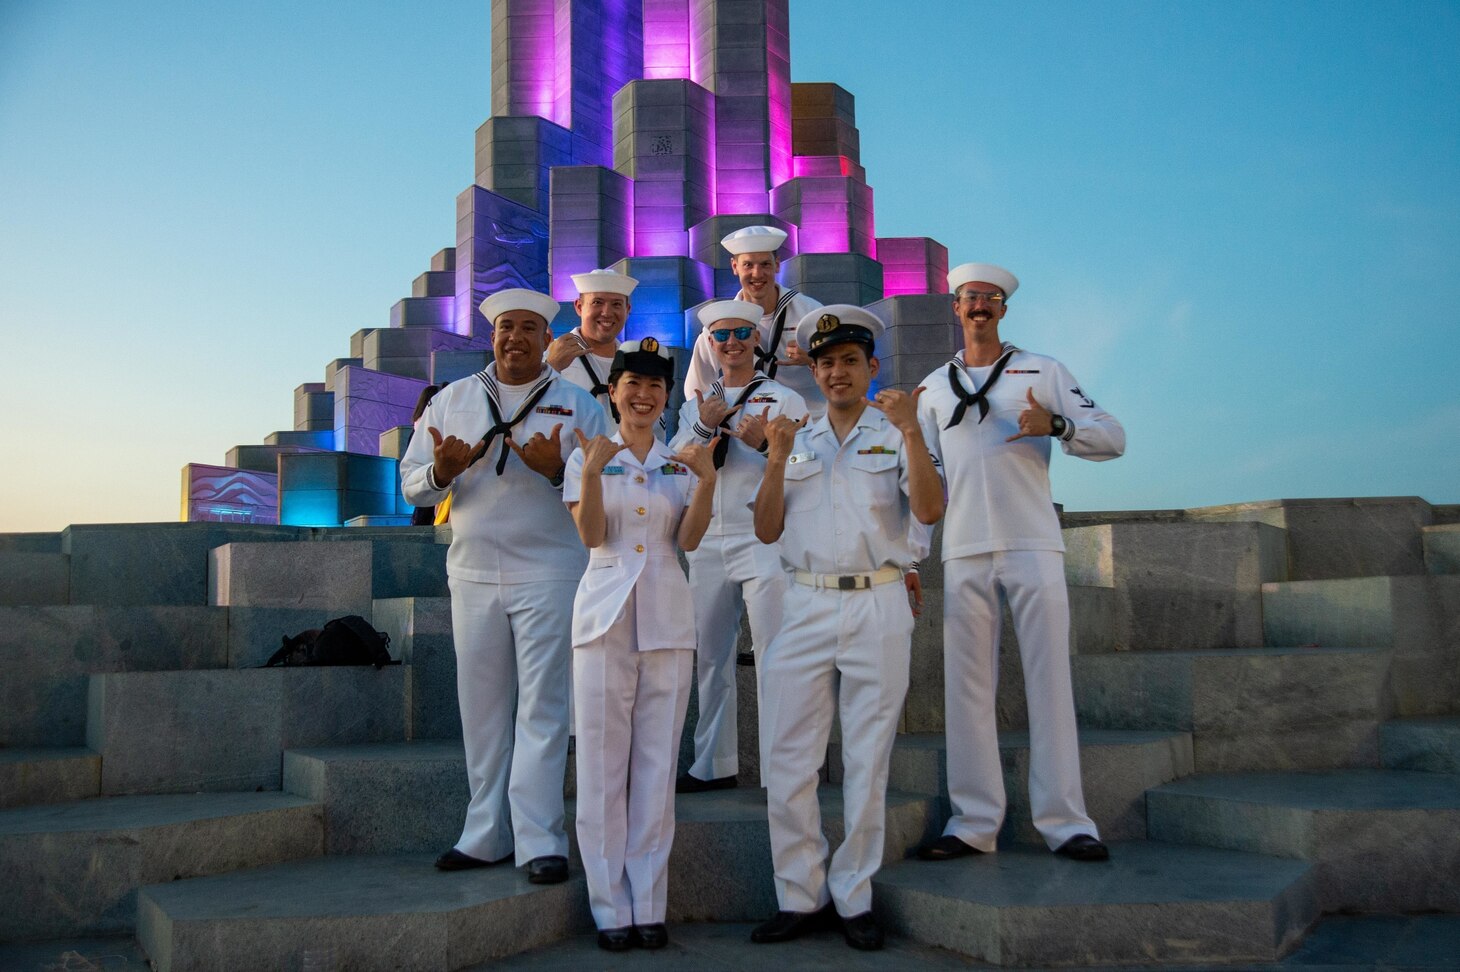 PHU YEN, Vietnam (June 20, 2022) – Members of the Commander, U.S. Pacific Fleet Band and the Japan Maritime Defense Force Band pose for a photo at the Vietnam opening ceremony during Pacific Partnership 2022. Now in its 17th year, Pacific Partnership is the largest annual multinational humanitarian assistance and disaster relief preparedness mission conducted in the Indo-Pacific. (U.S. Navy photo by Mass Communication Specialist 2nd Class Jacob Woitzel)